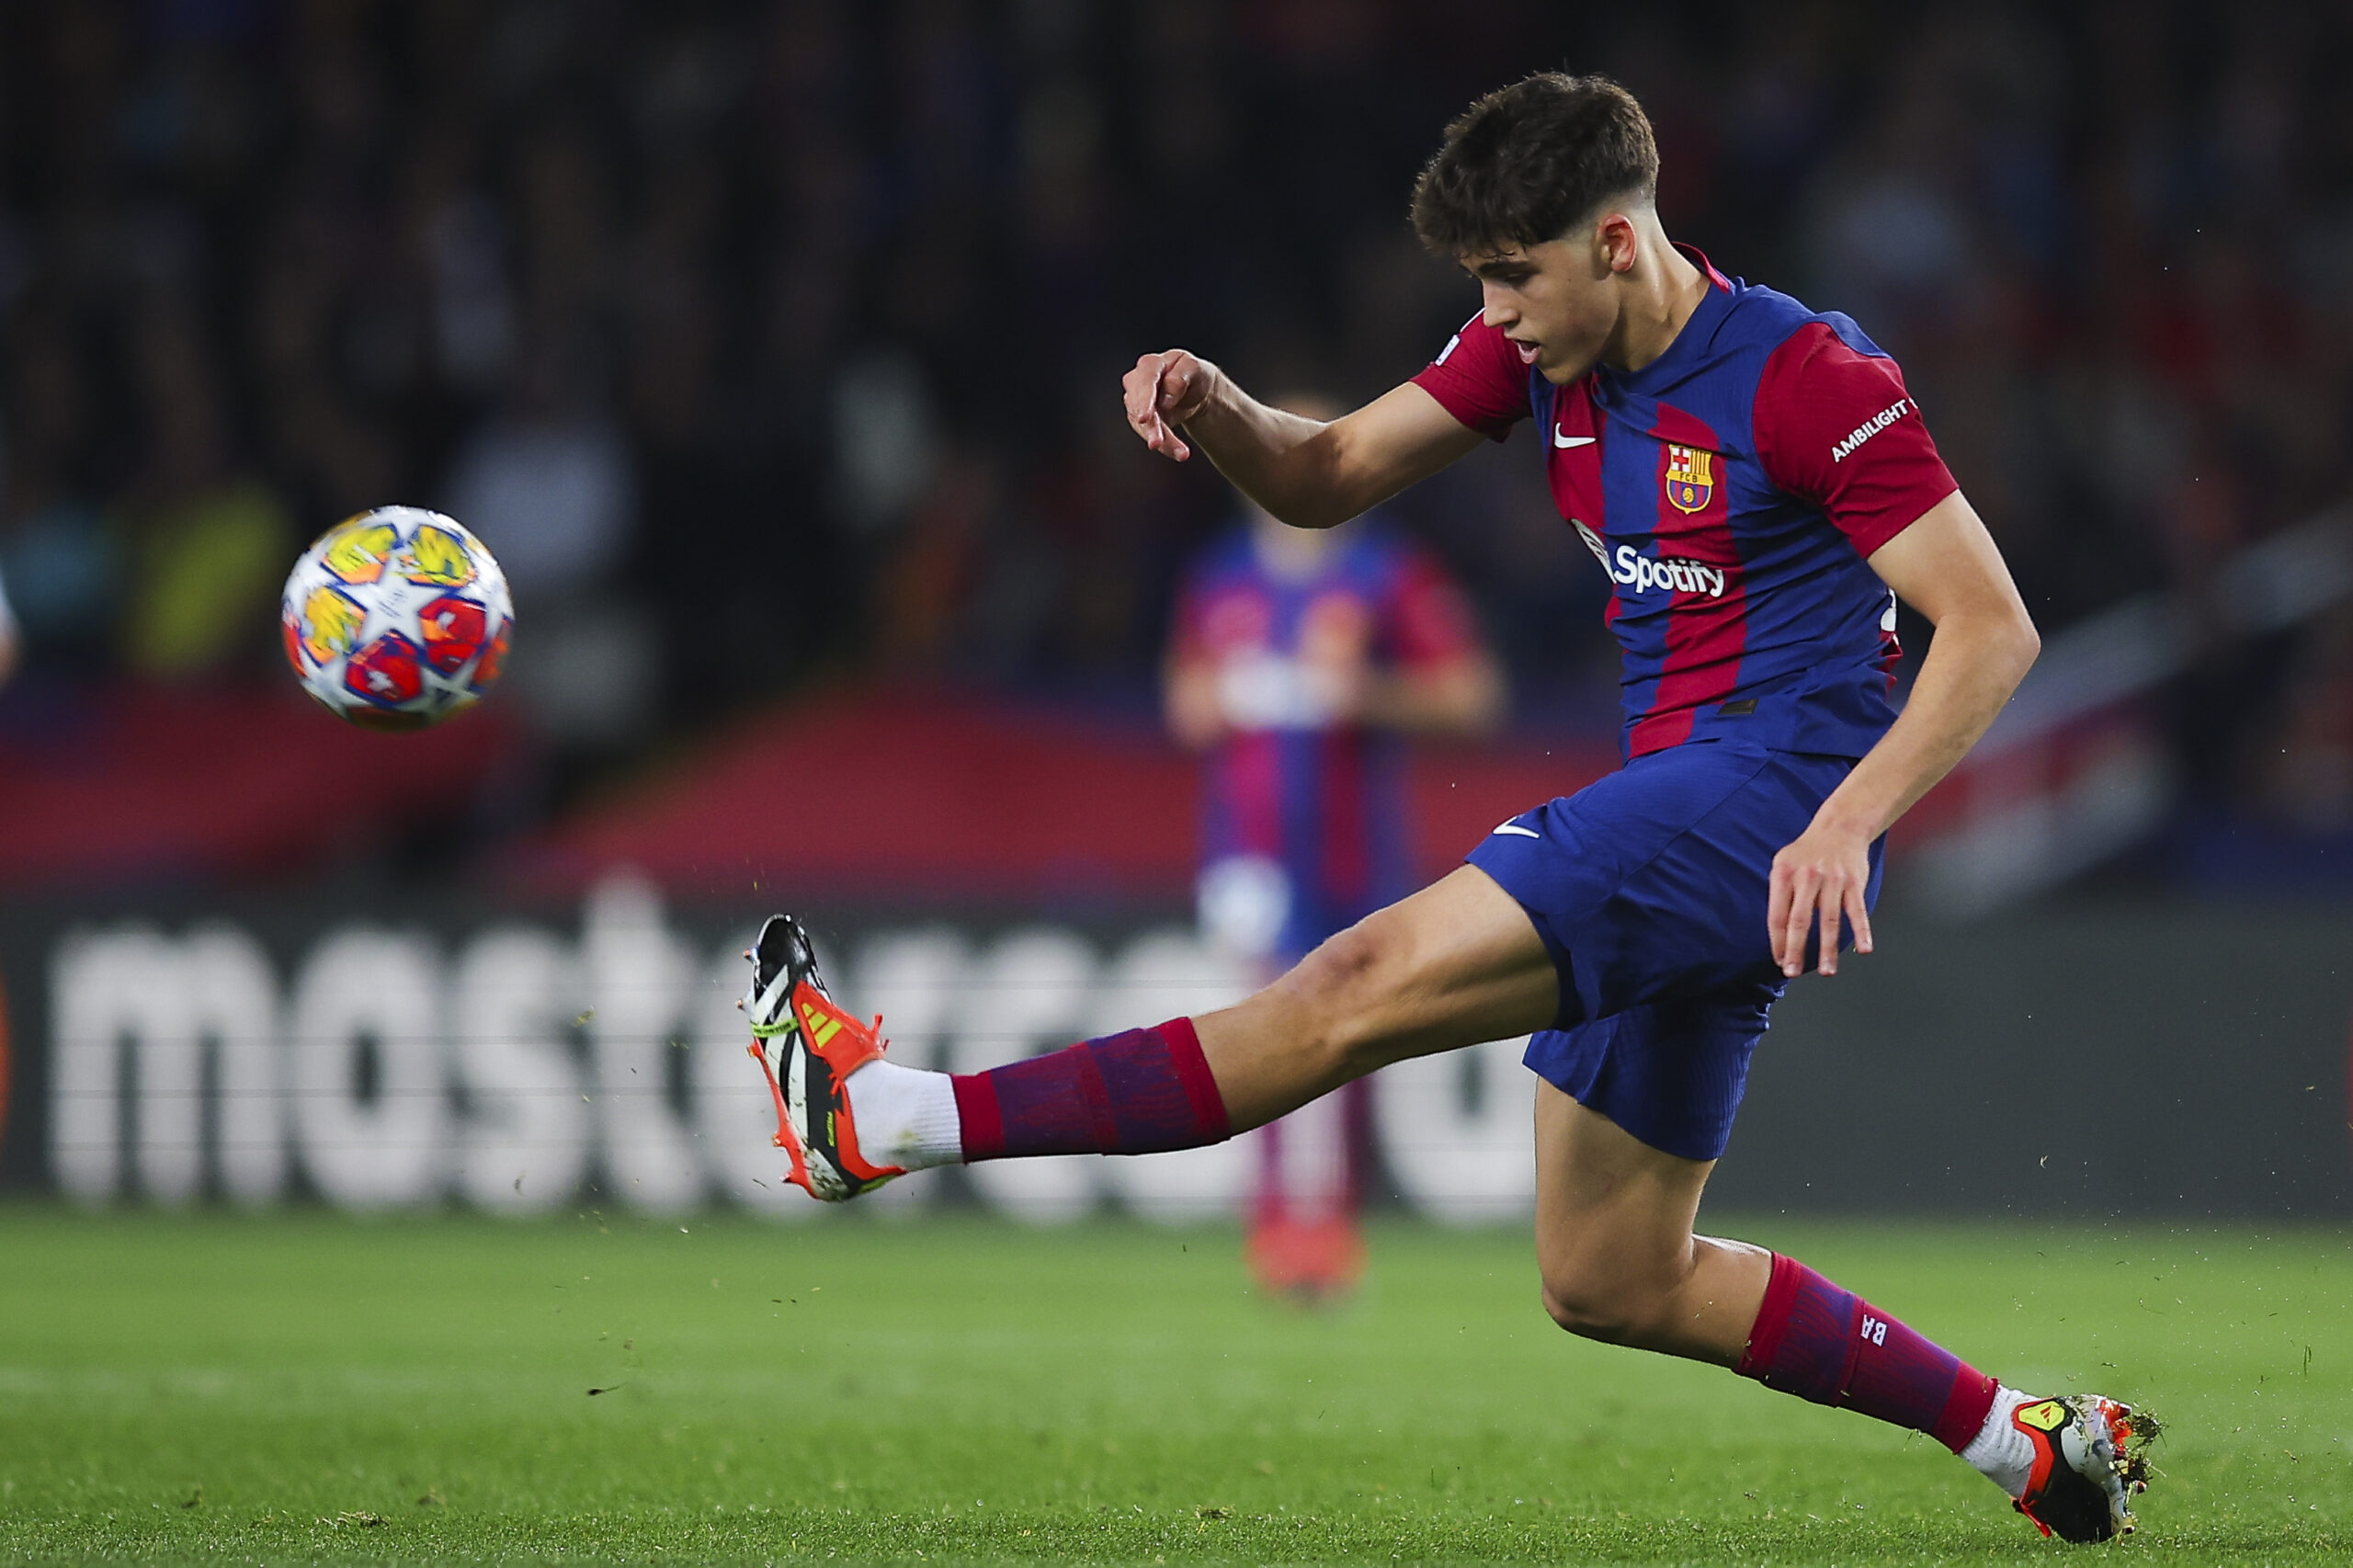 Barcelona defender Pau Cubarsi is a rising star with rising Chelsea interest